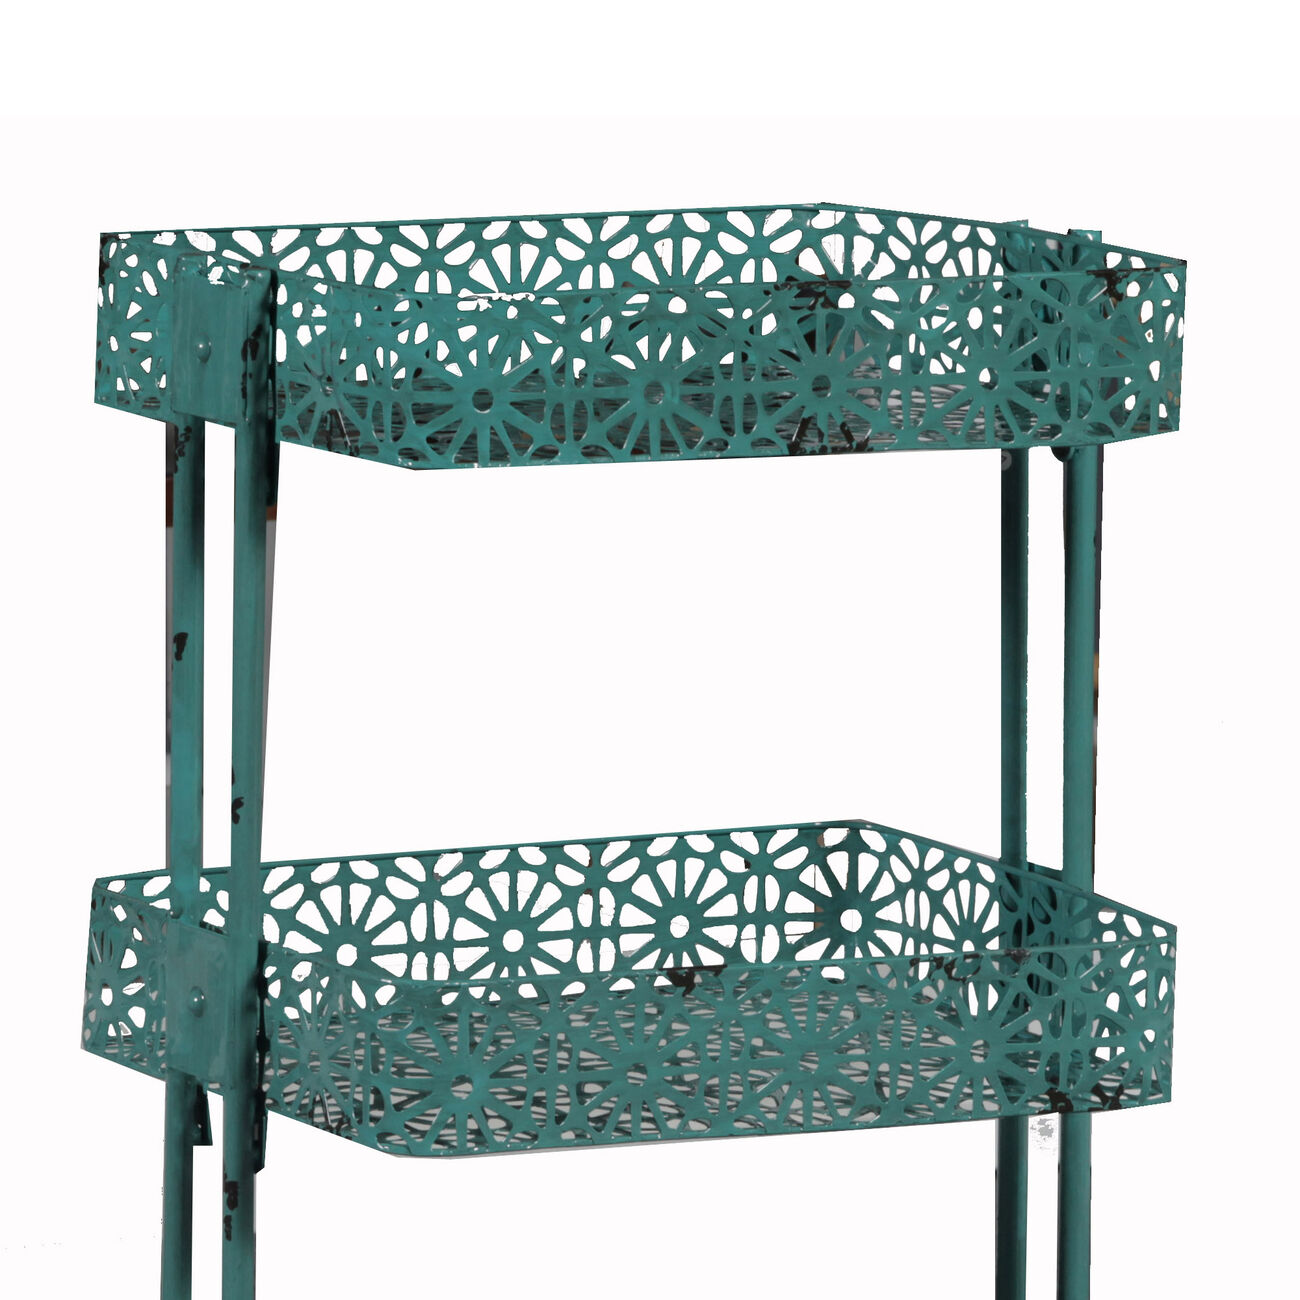 3 Tier Spacious Metal Cart with Pierced Floral Design, Blue